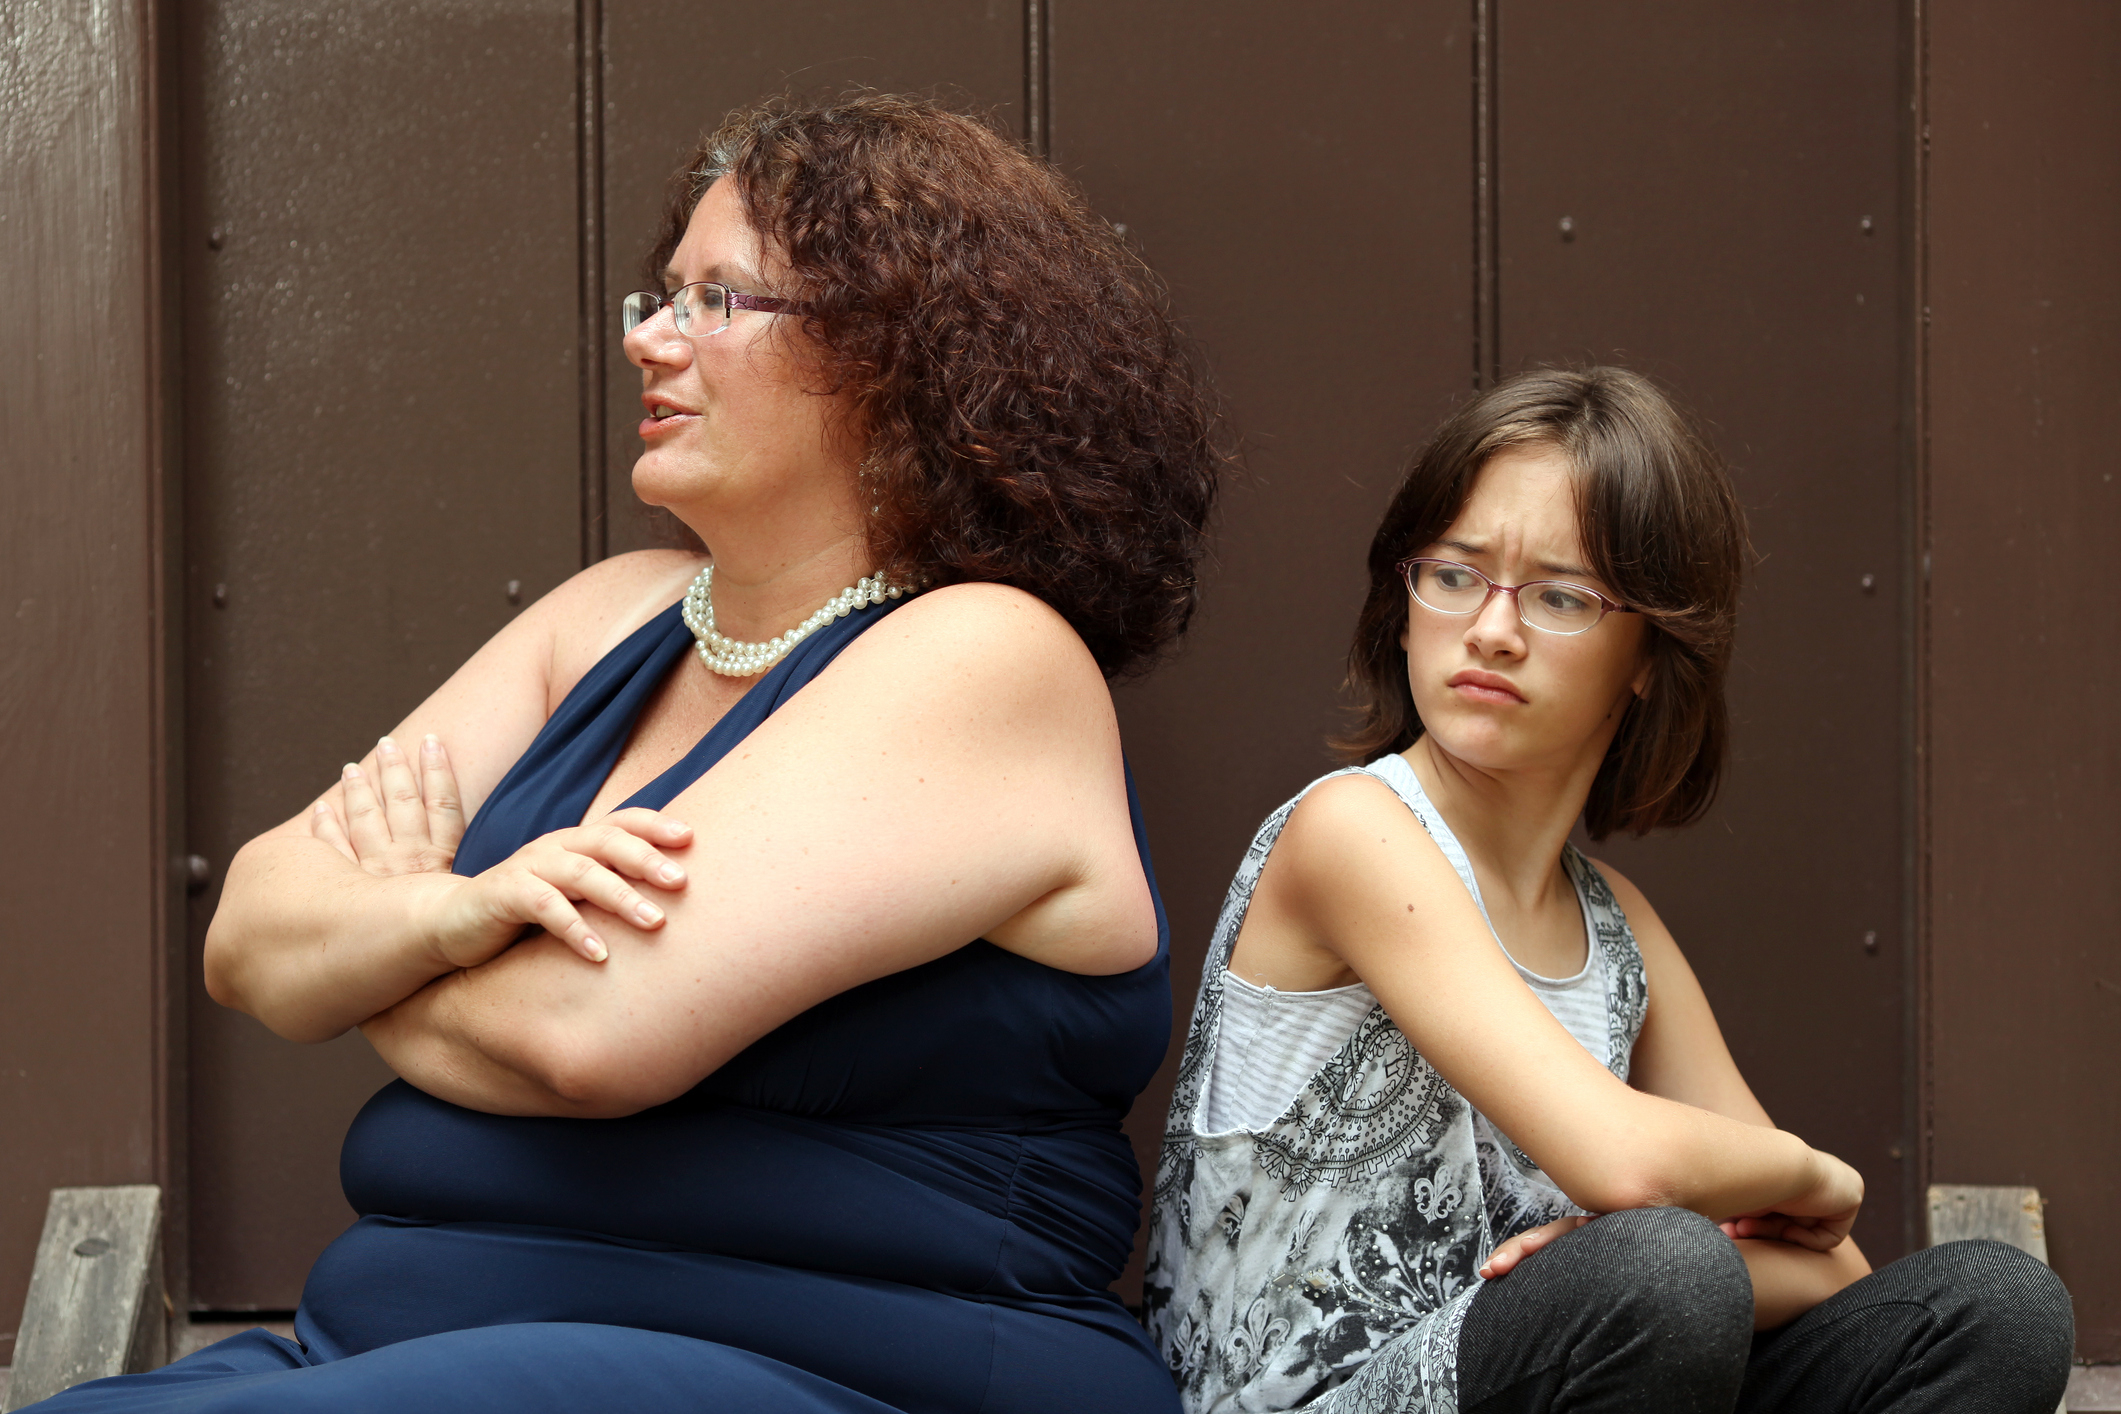 Woman and girl seated side by side, looking away with thoughtful expressions